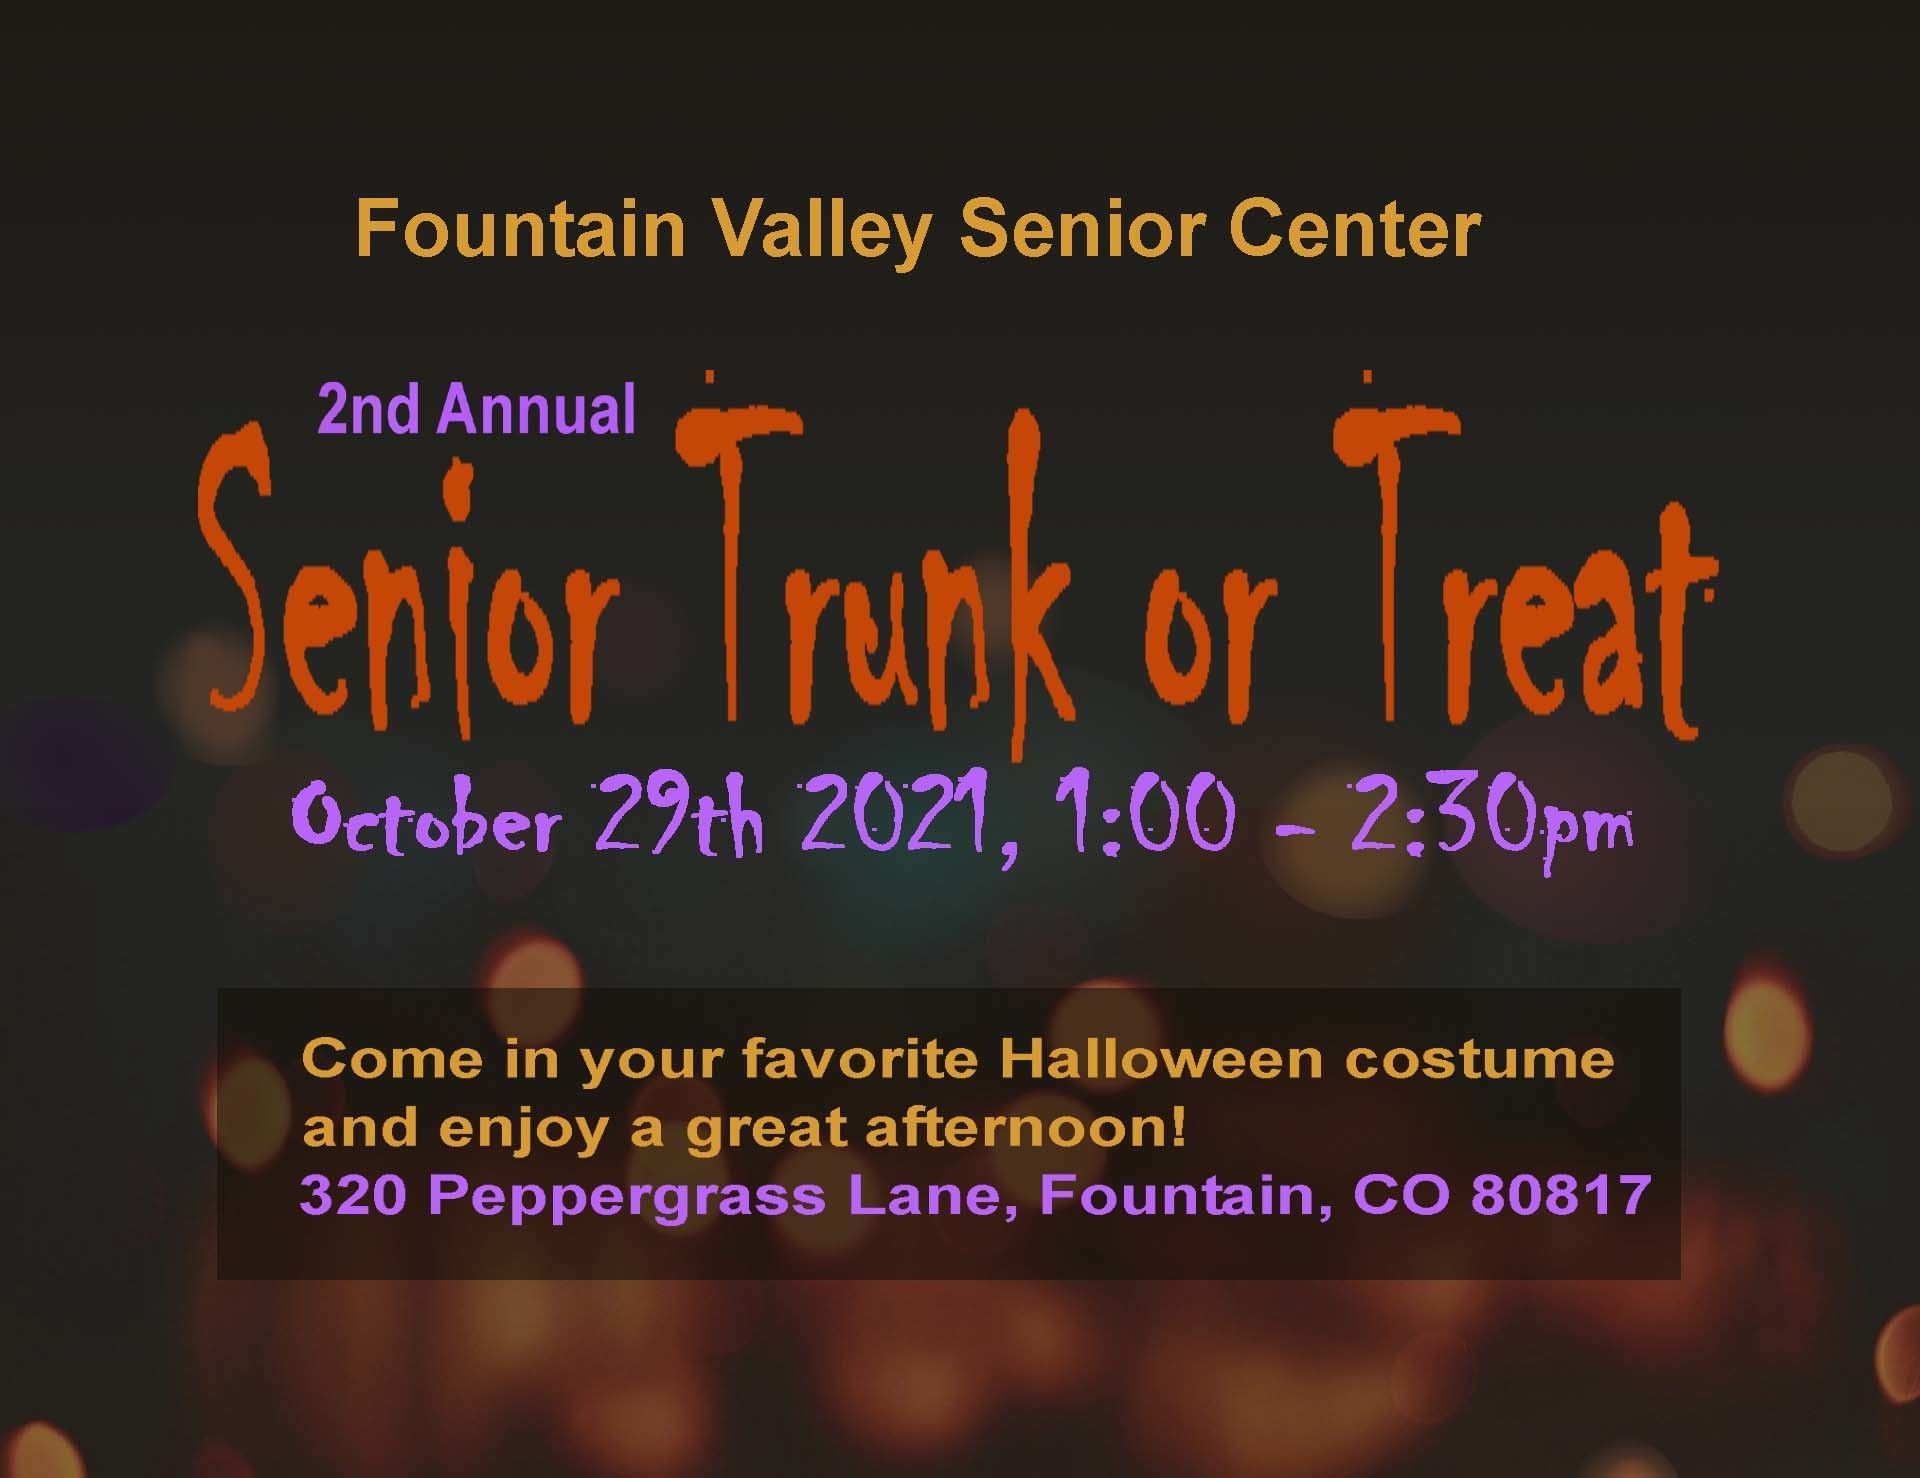 2nd Annual Senior Trunk or Treat